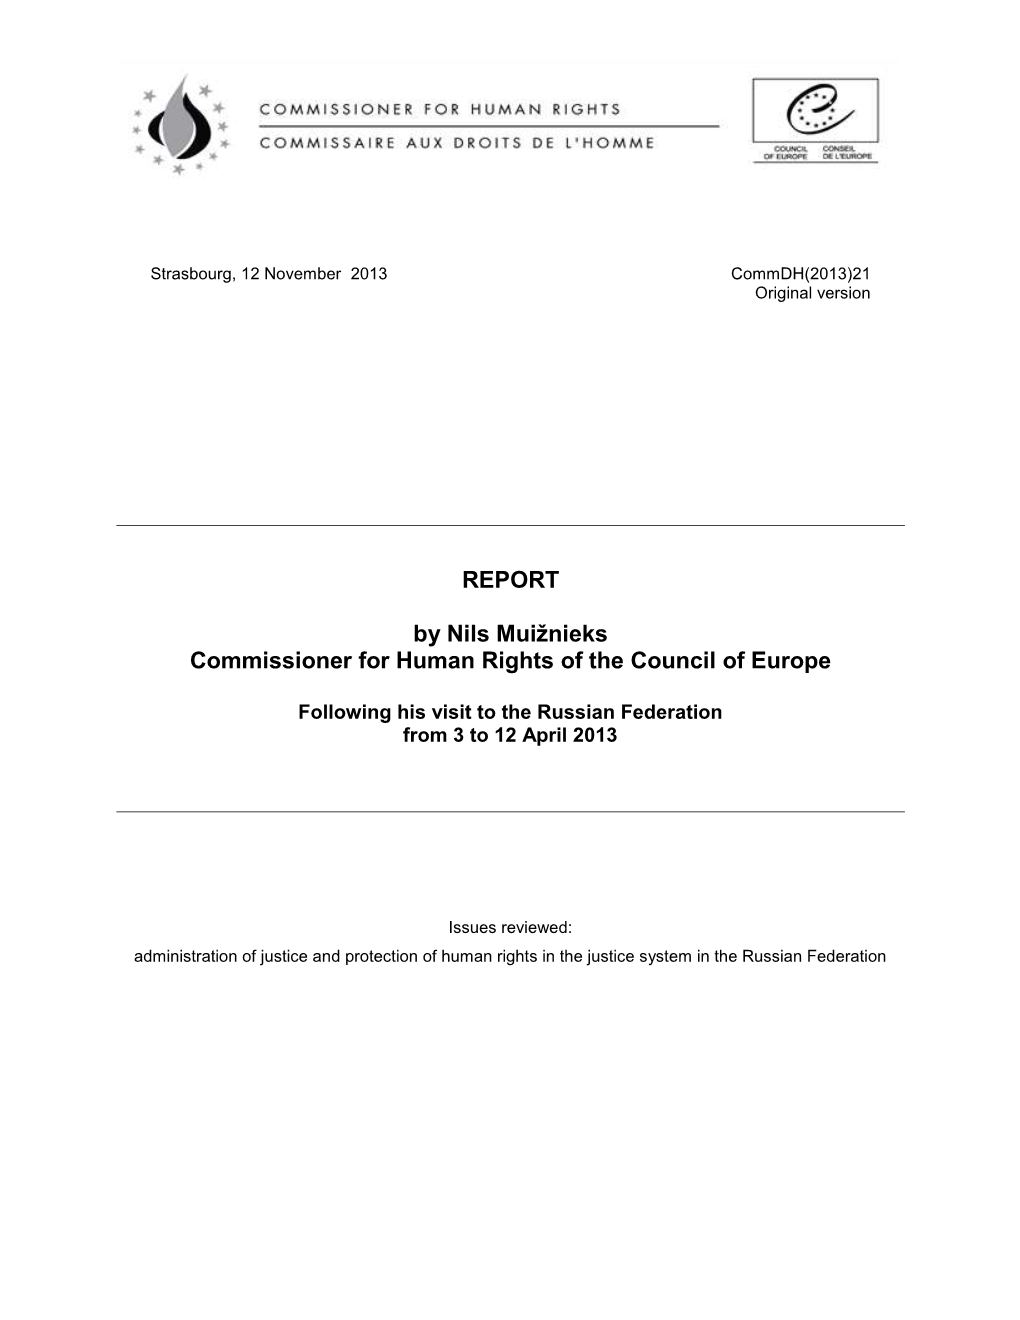 REPORT by Nils Muižnieks Commissioner for Human Rights Of